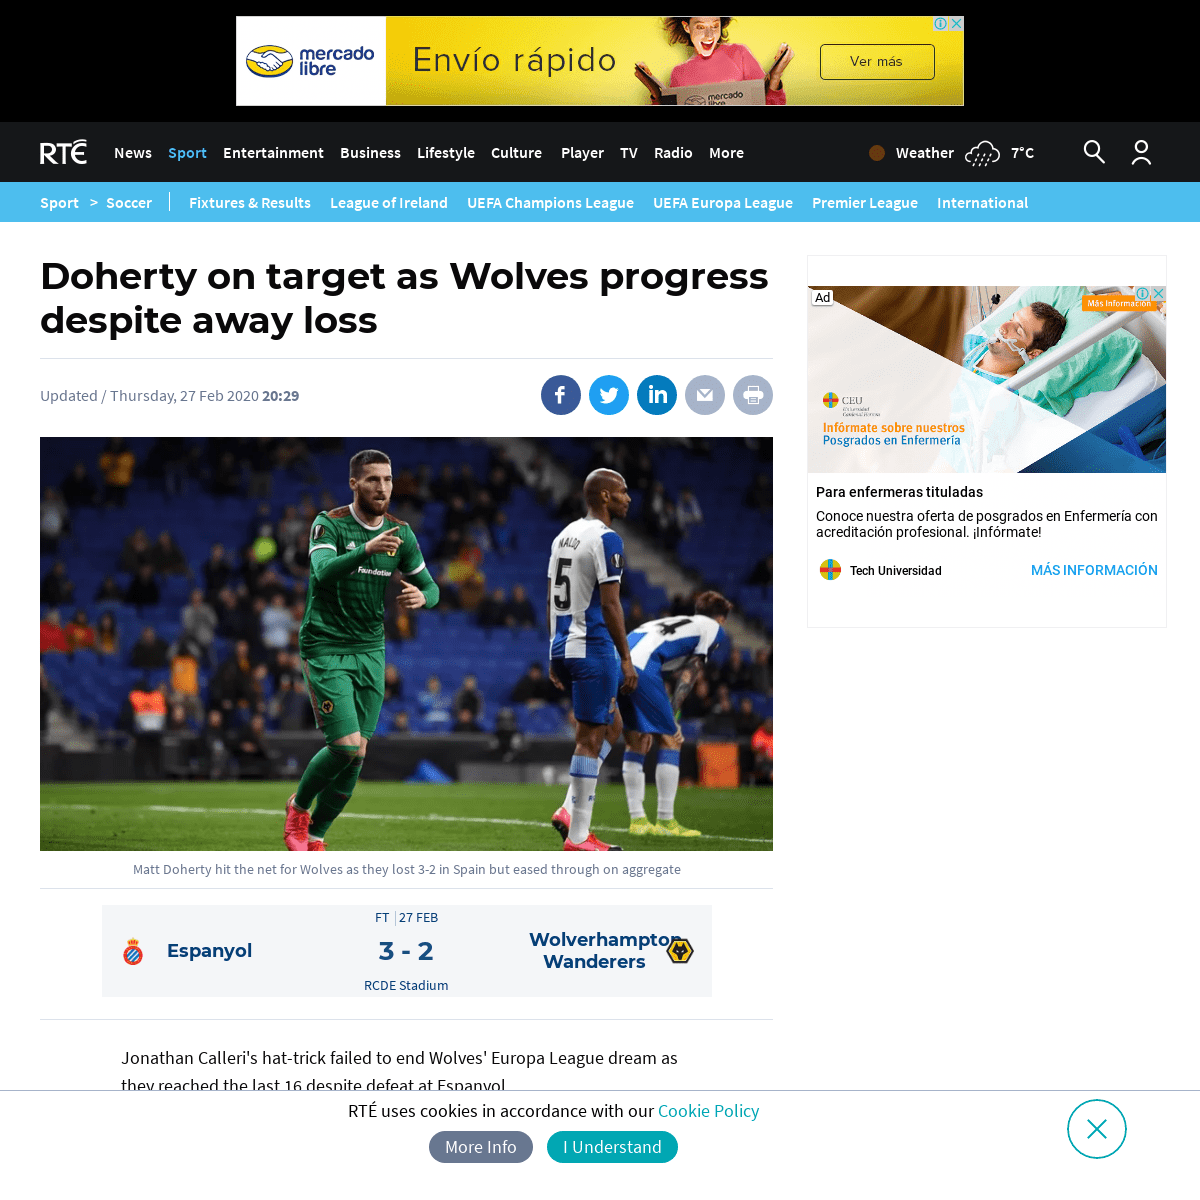 A complete backup of www.rte.ie/sport/soccer/2020/0227/1118060-doherty-on-target-as-wolves-progress-despite-away-loss/